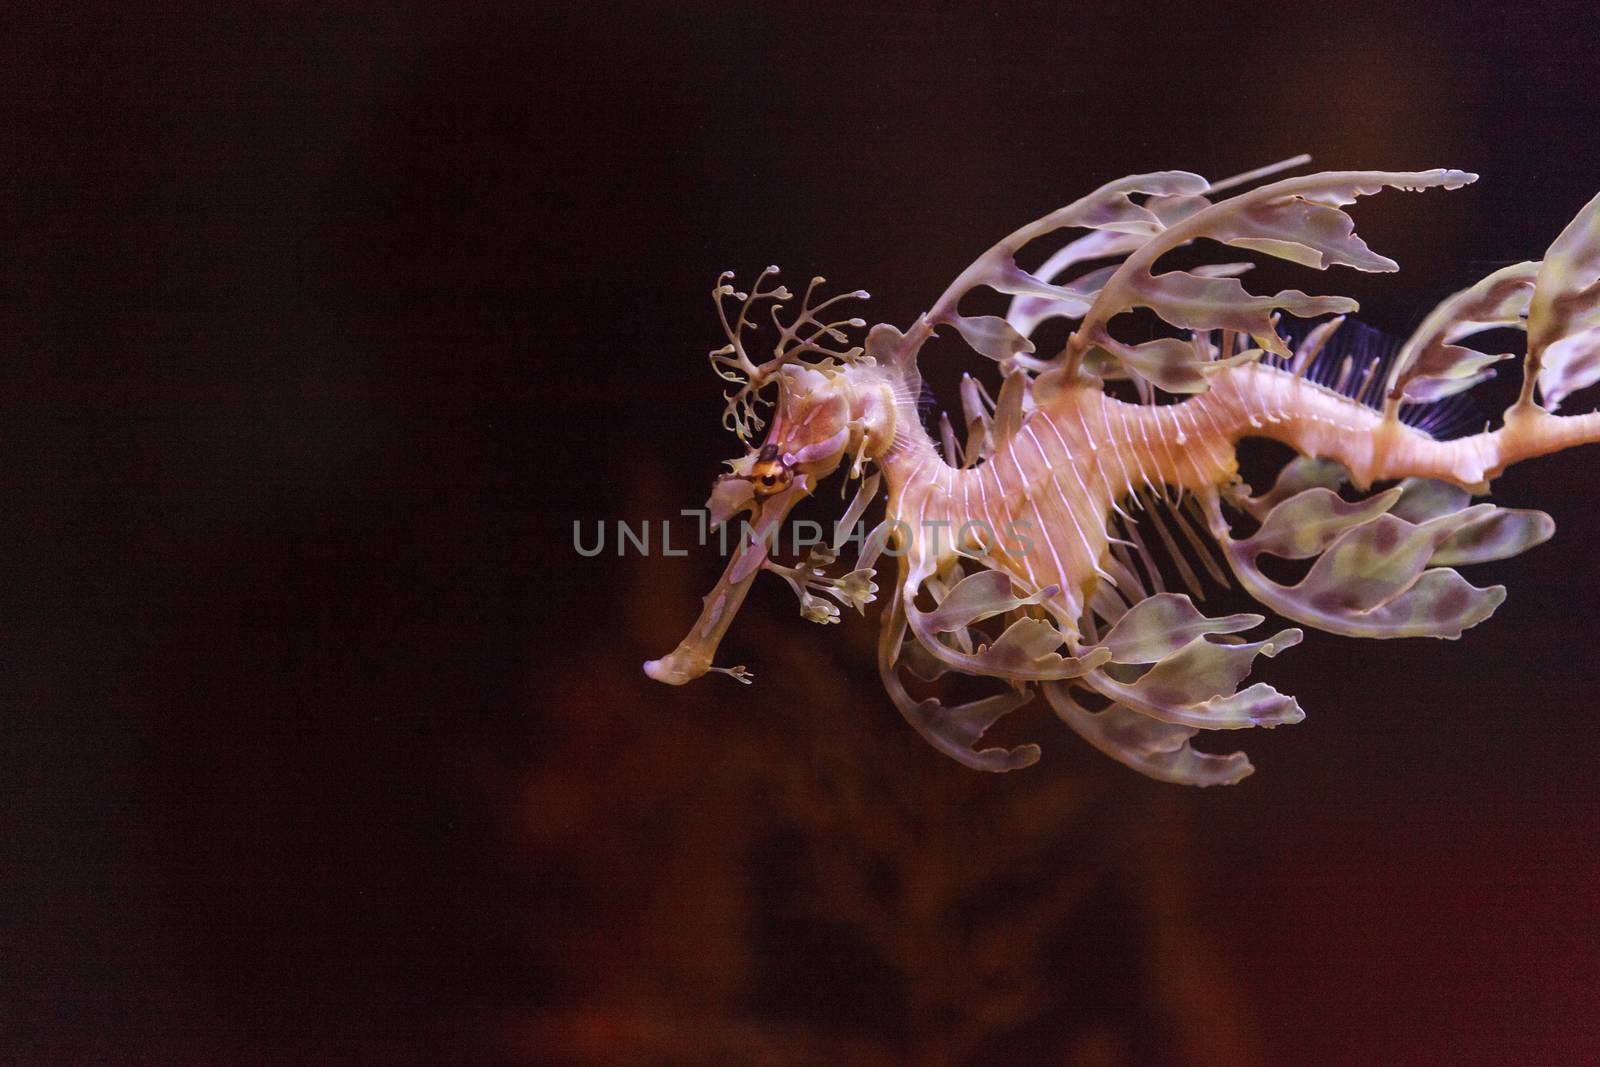 The leafy seadragon, Phycodurus eques, is often yellow and has many leaf-like appendages to help it blend in with kelp in the ocean.